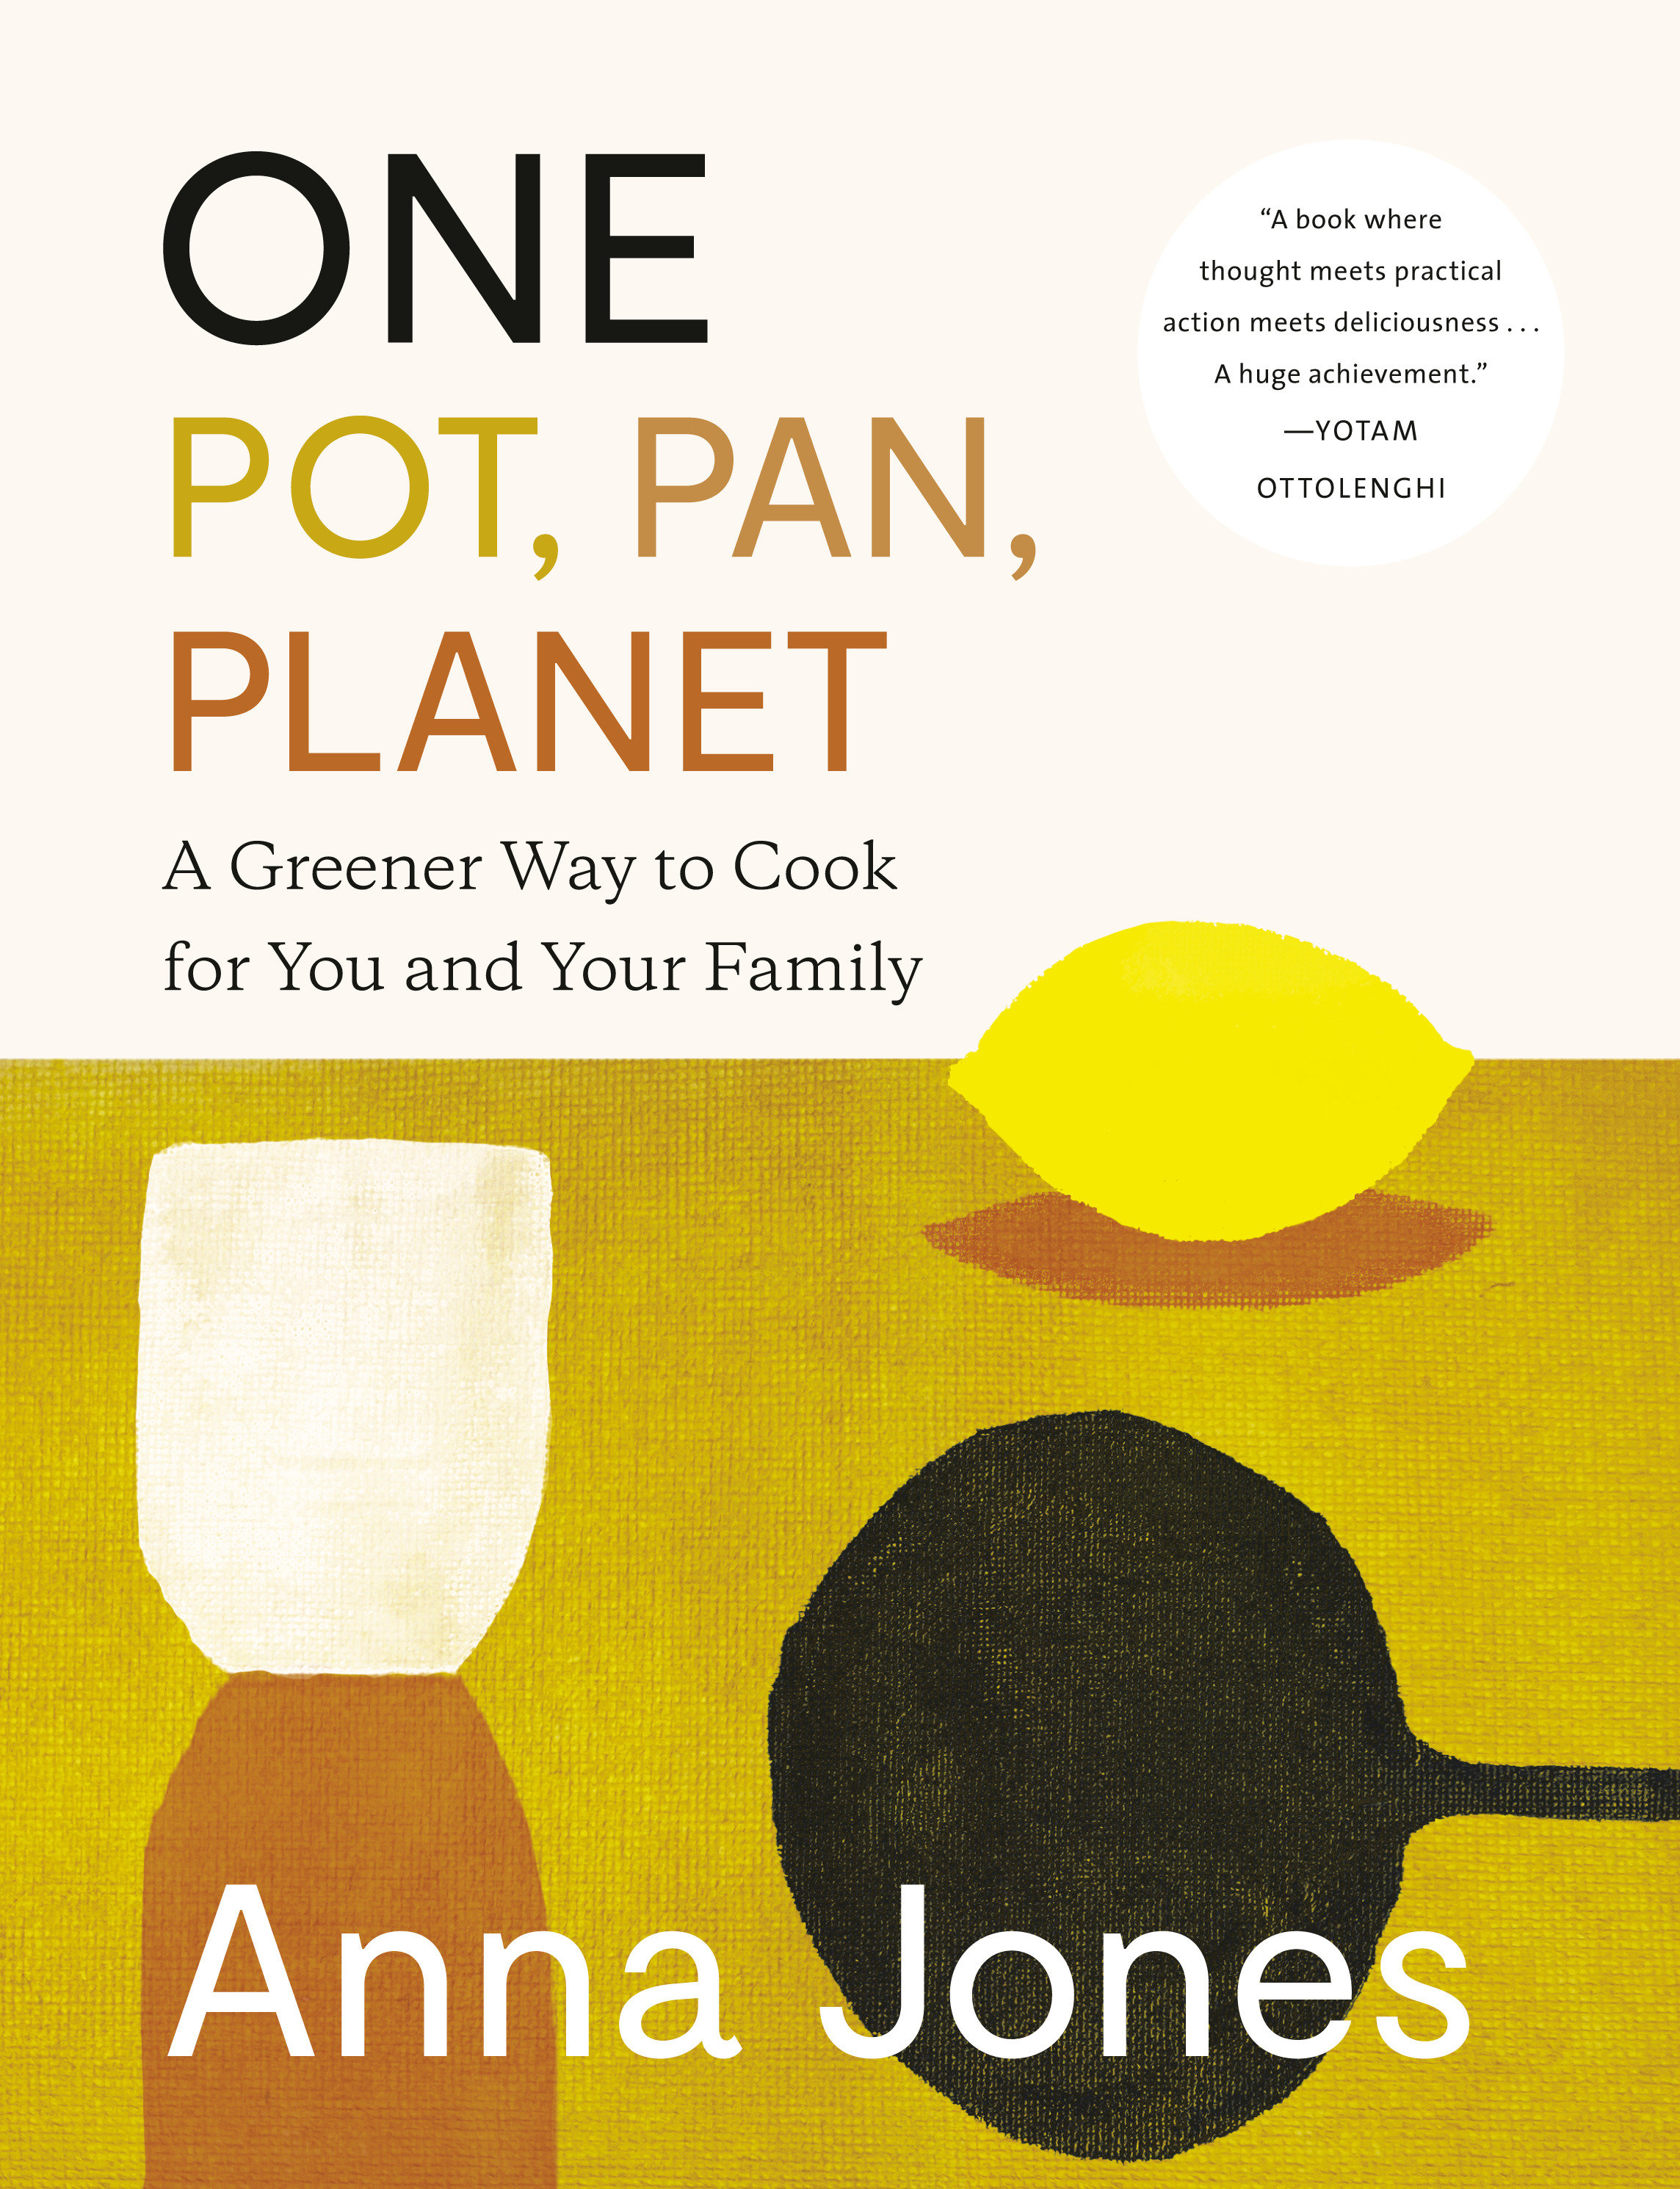 One: Pot, Pan, Planet (Hardcover Book)